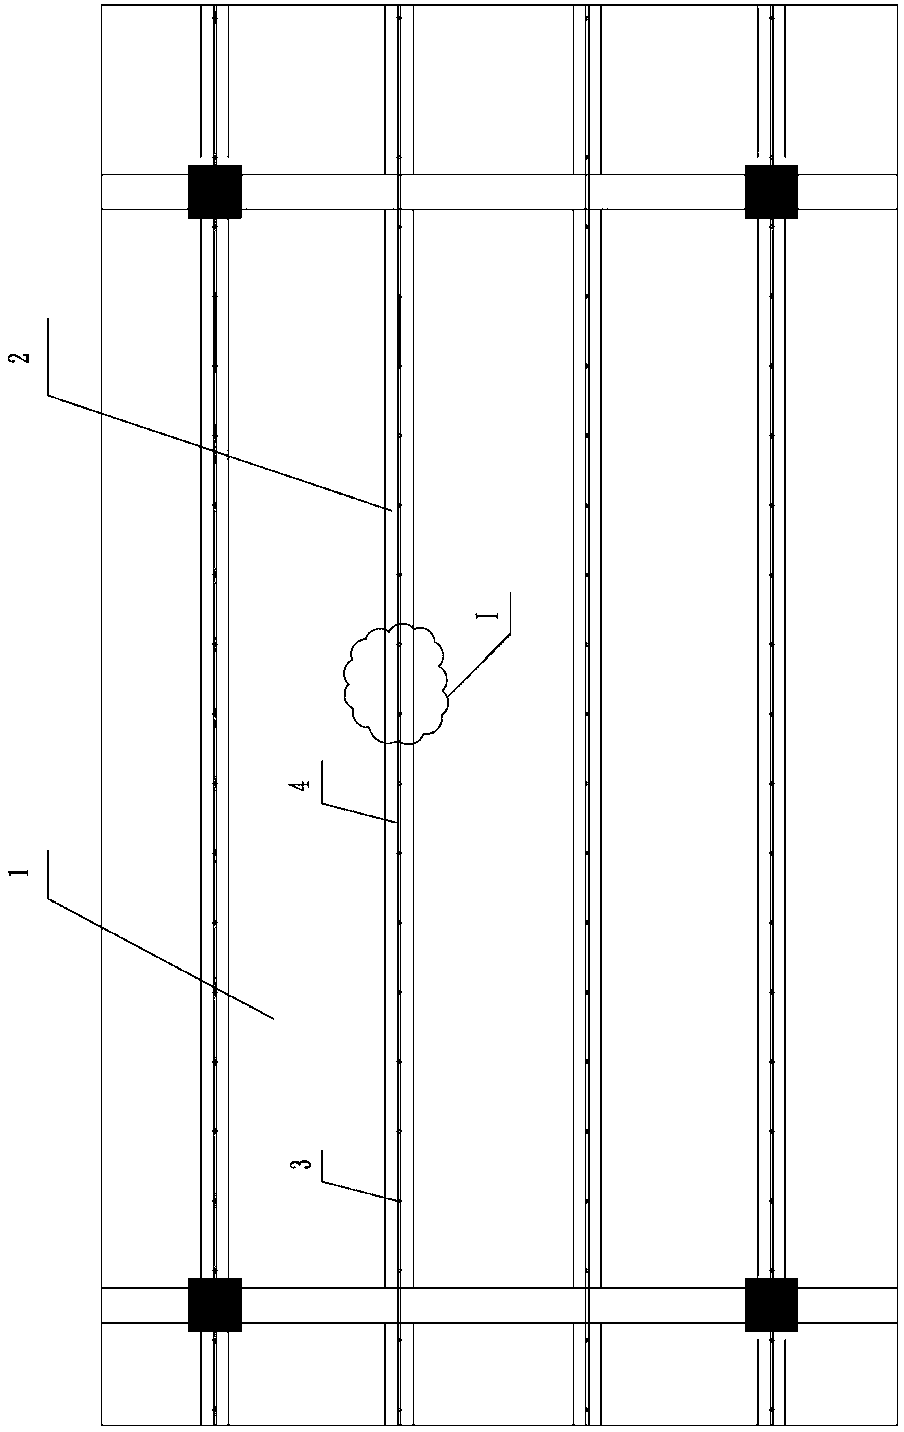 Accurate leveling device for cast-in-situ concrete flooring formed in one step and construction method